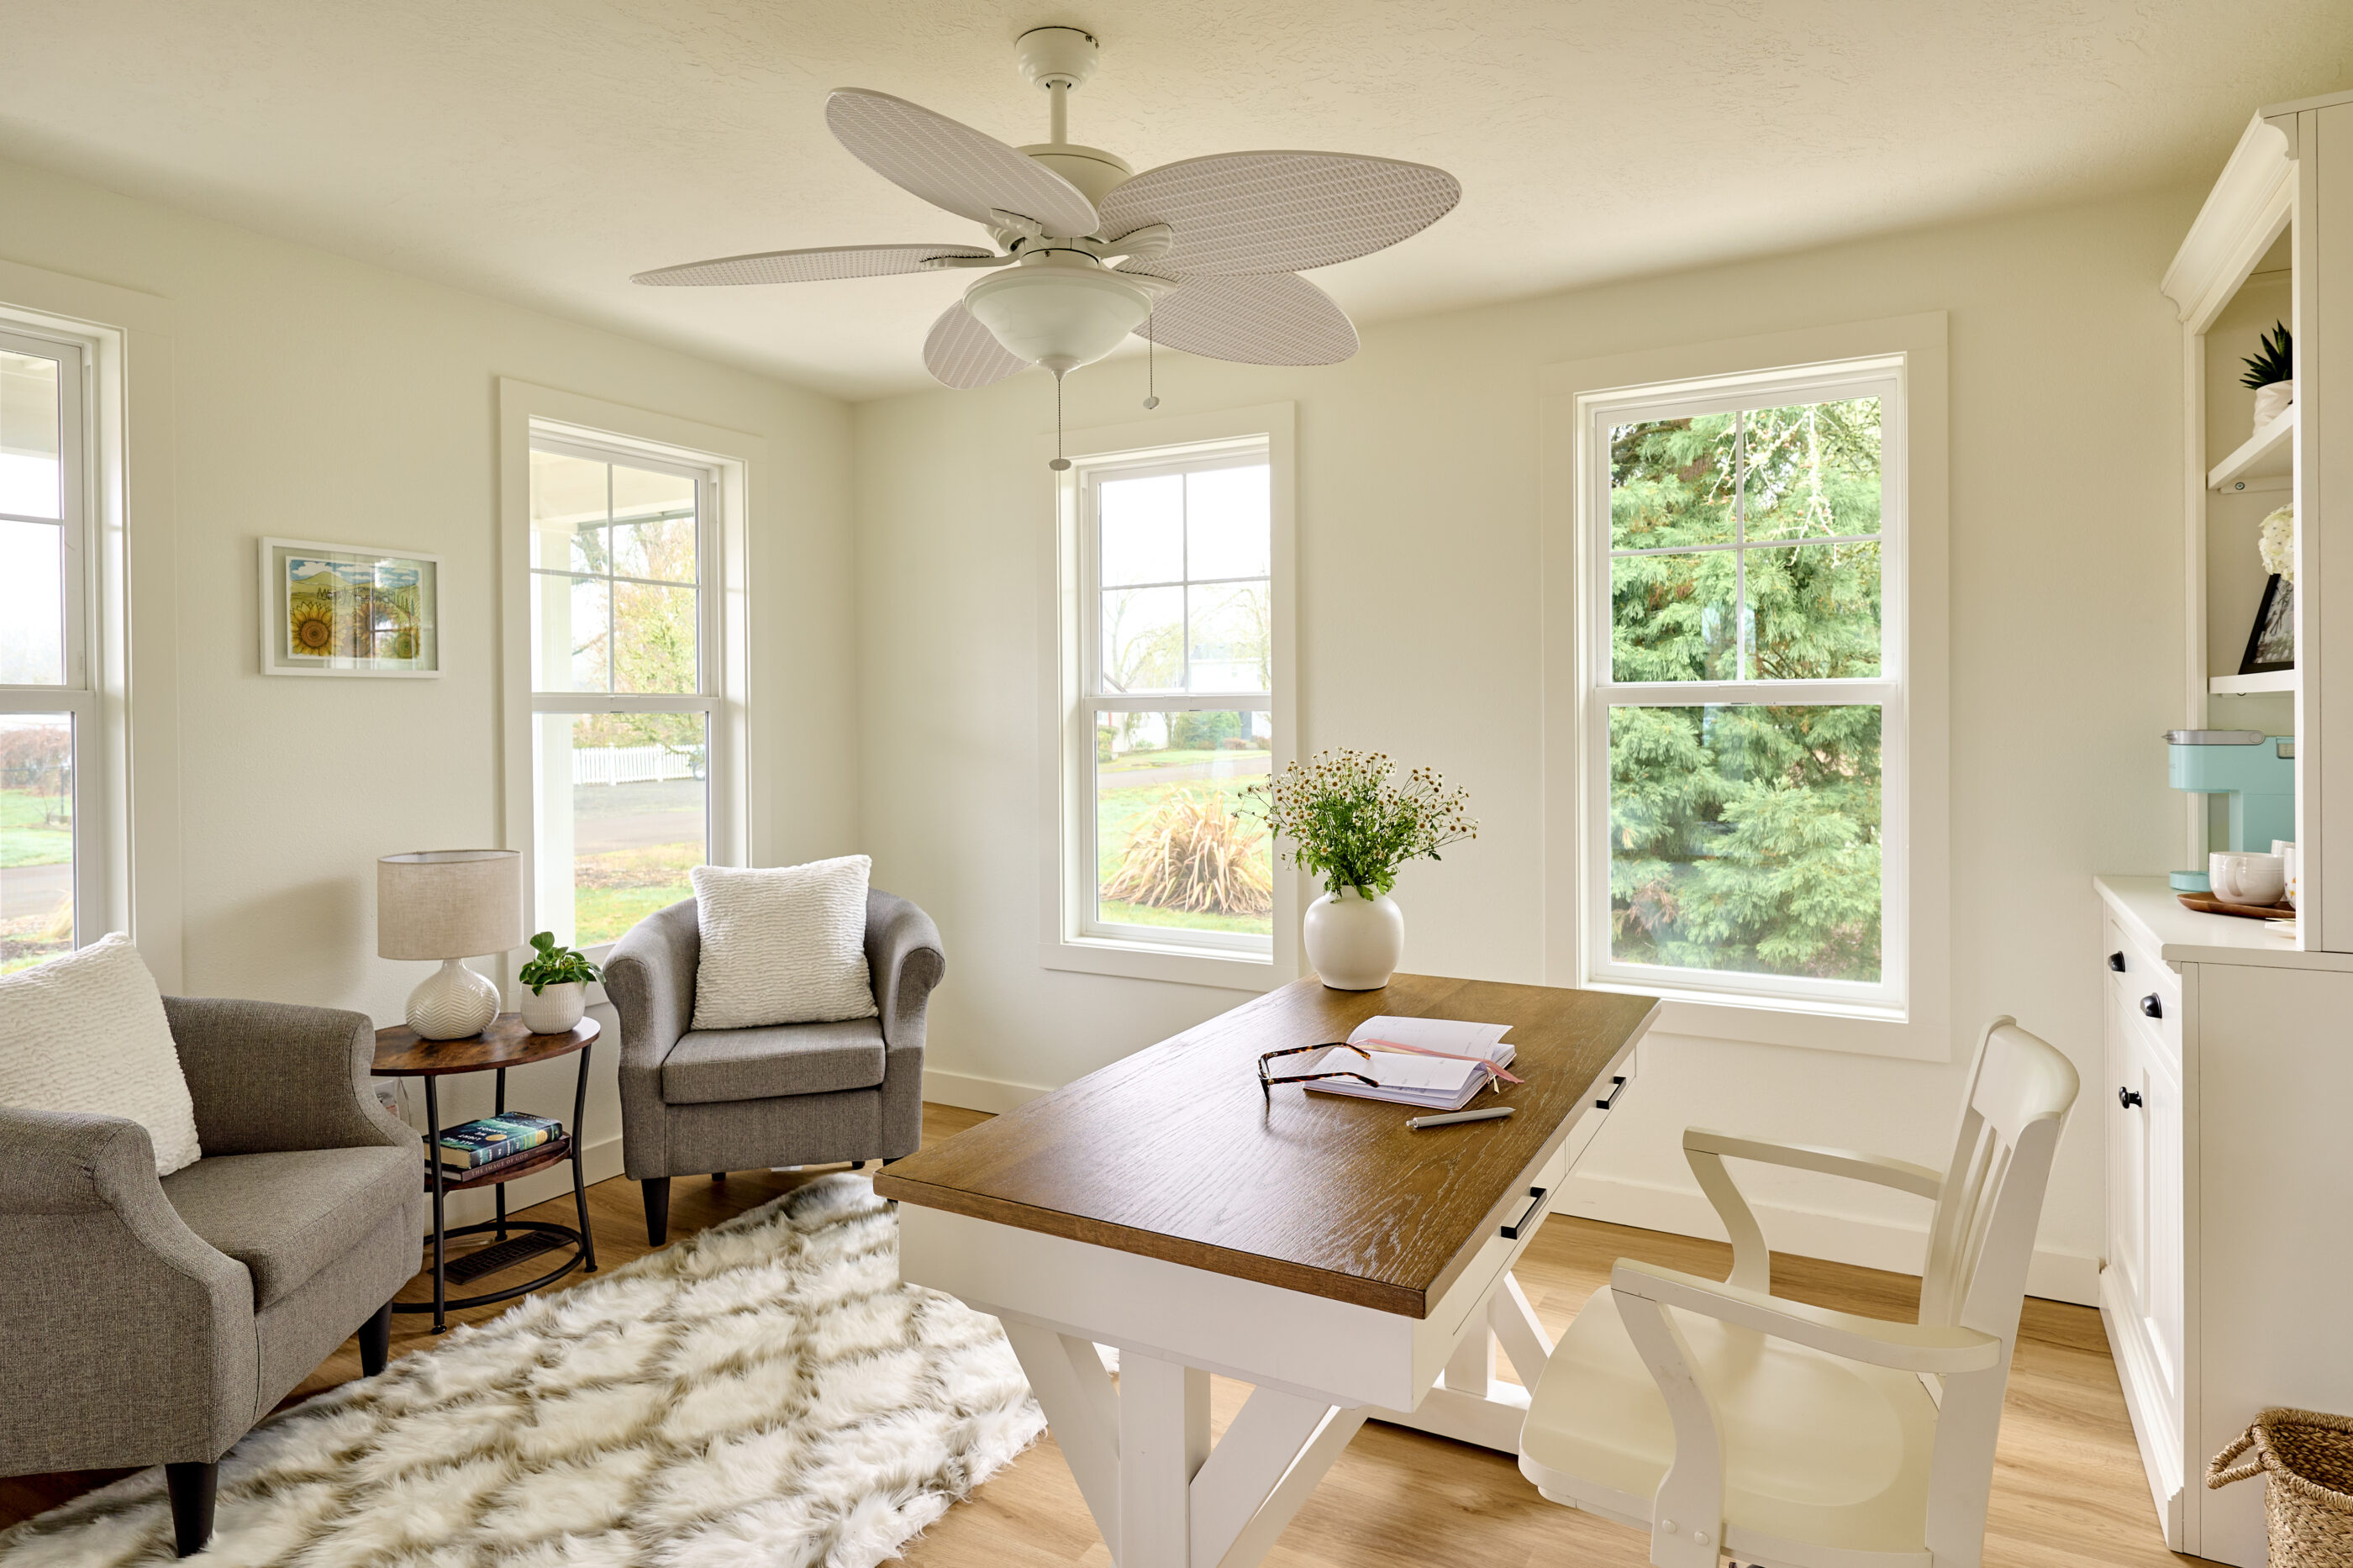 New Windows add natural light to this home office by Powell Construction of Corvallis